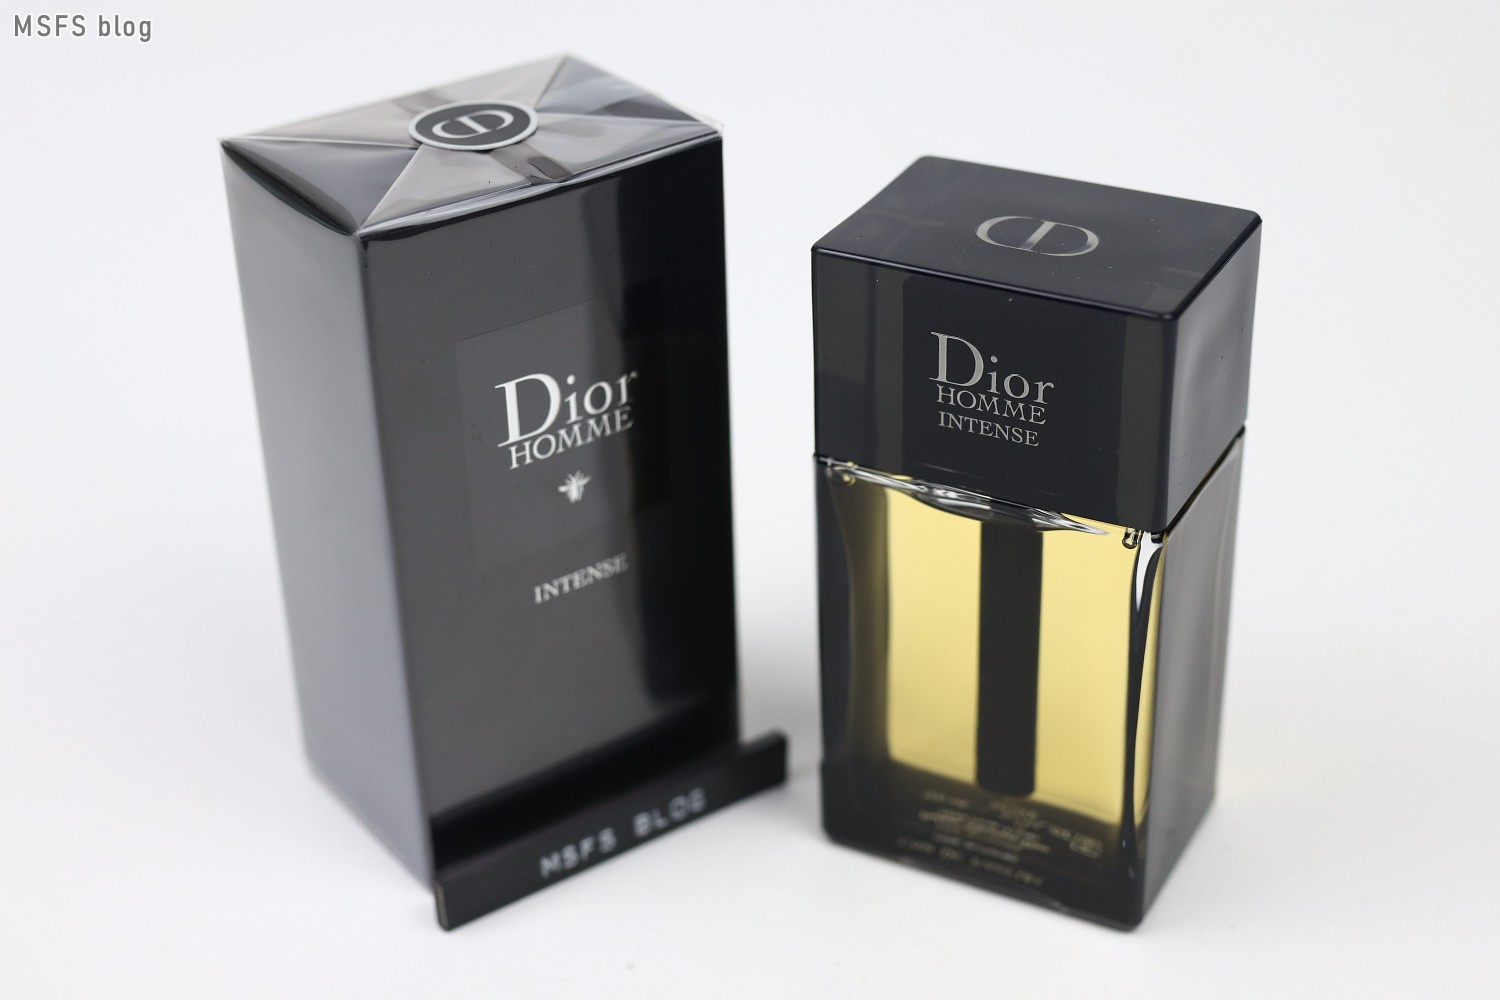 Homme 2020. Dior homme 2020 Dior. Dior homme 2020. Dior homme intense. CD Dior homme intense EDP deo.